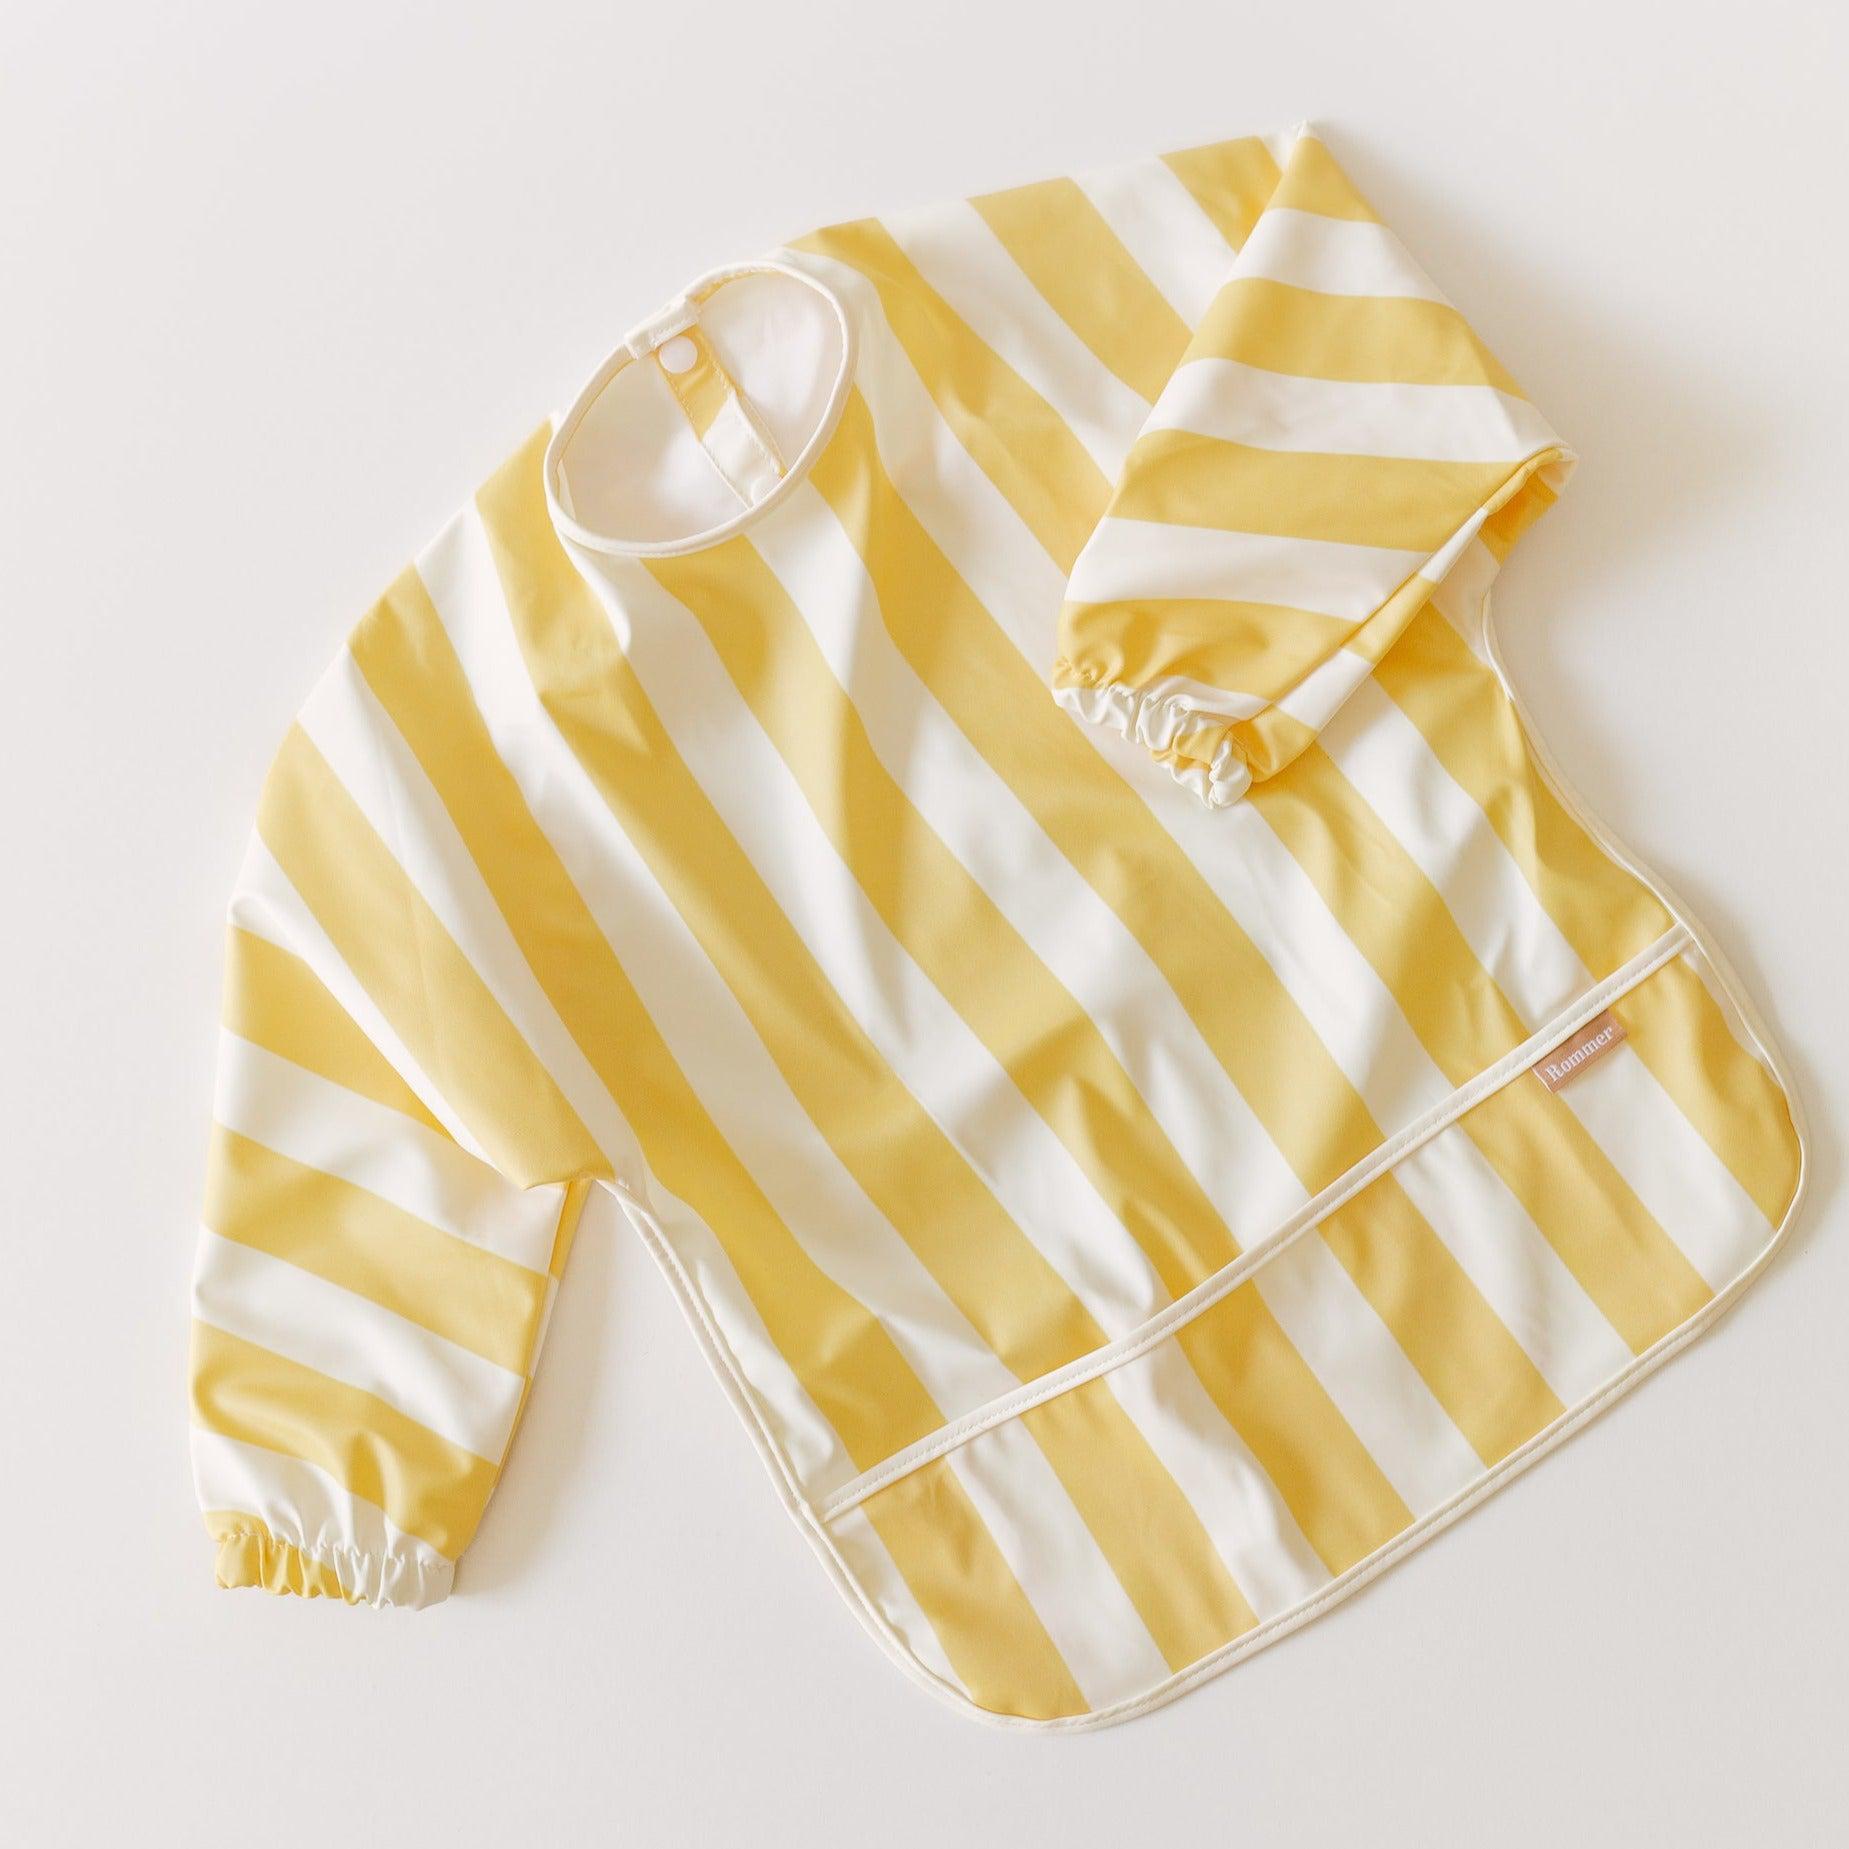 The Rommer Smock Bib, made from super soft fabric, features yellow and white striped colour variations on a white surface.